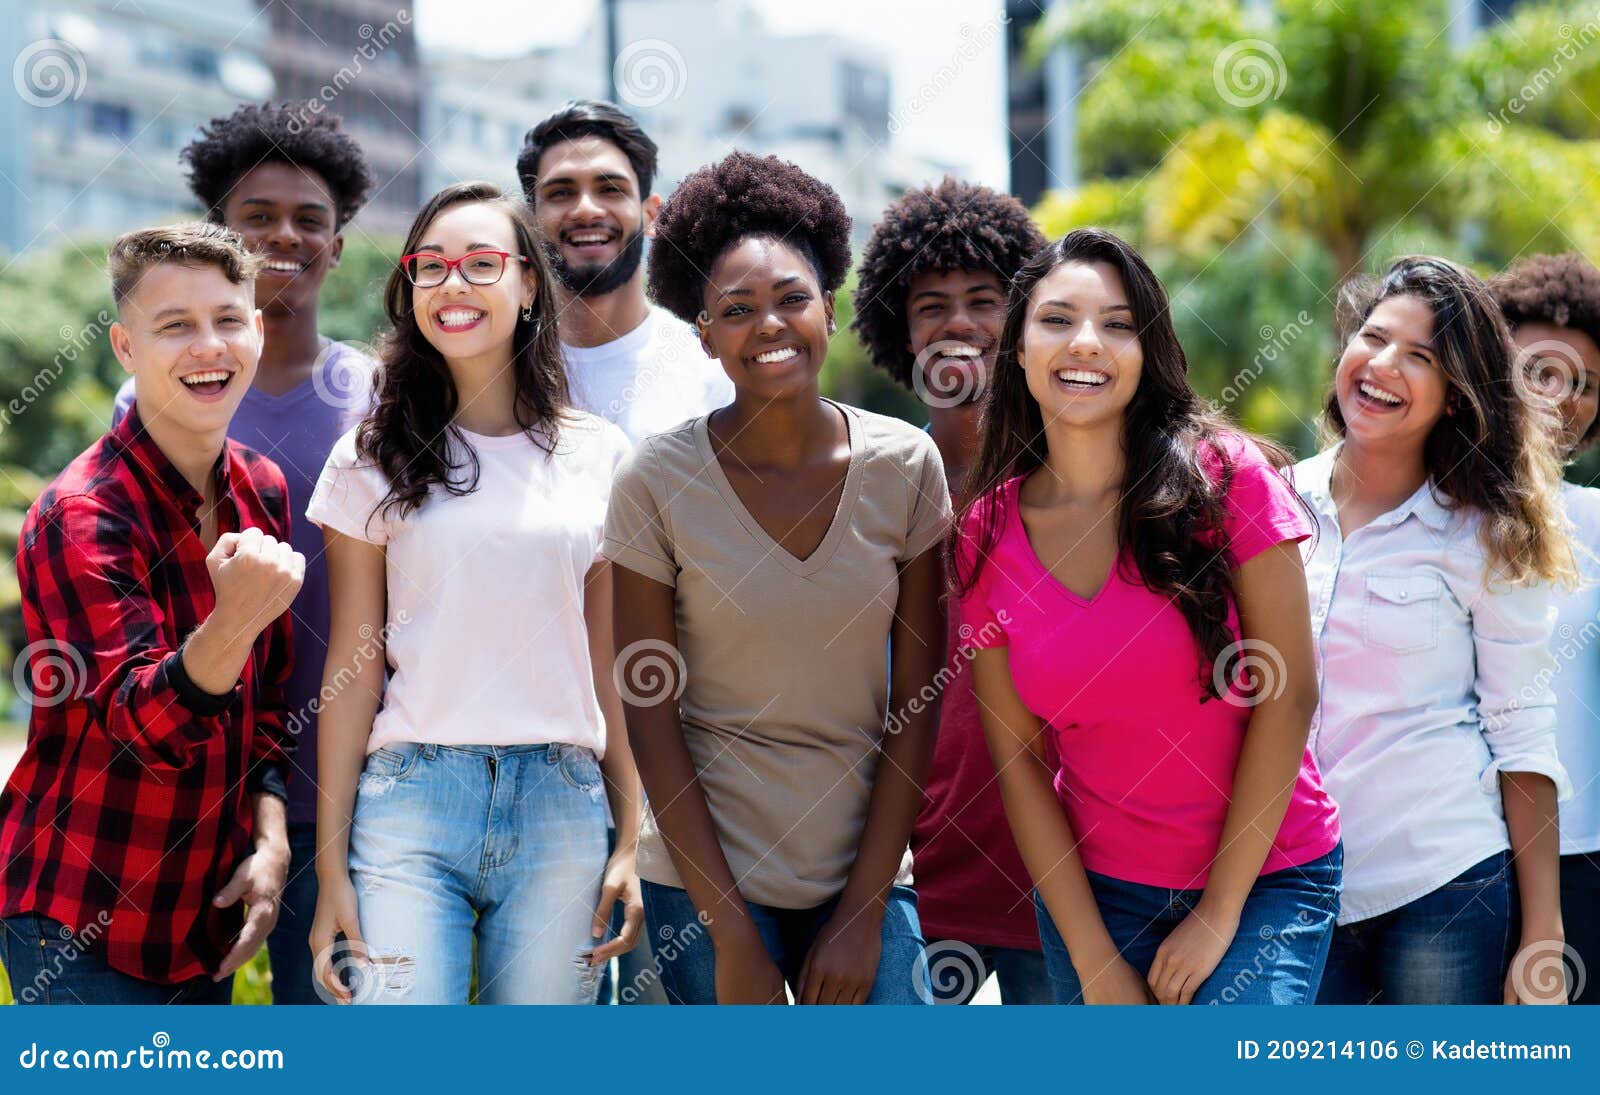 youth of brazil - latin and hispanic and african american and caucasian young adults